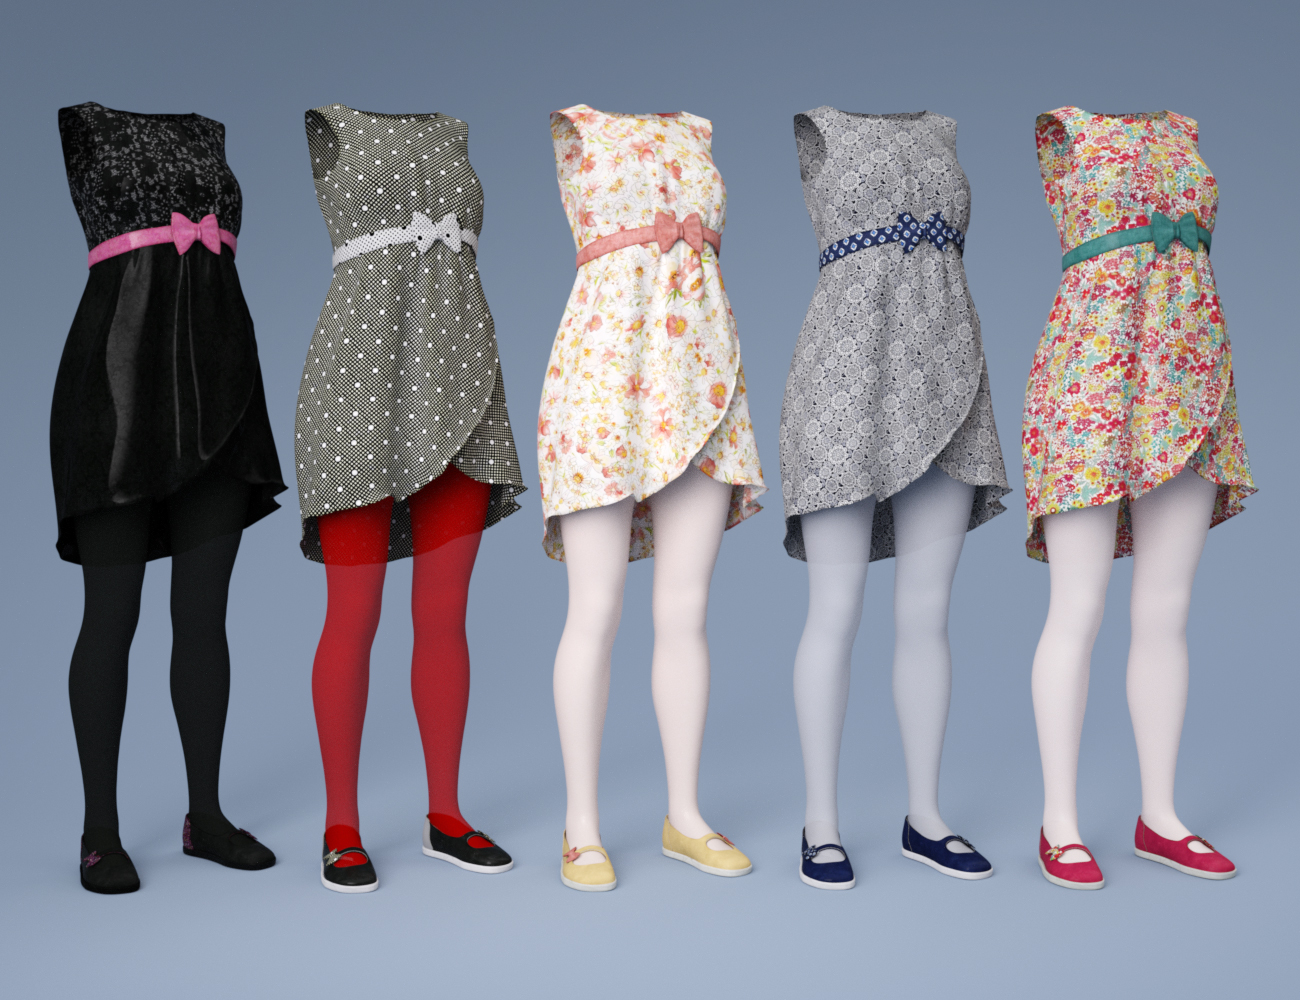 Sunday Morning Outfit for Genesis 3 Female(s) by: Anna BenjaminBarbara Brundon, 3D Models by Daz 3D